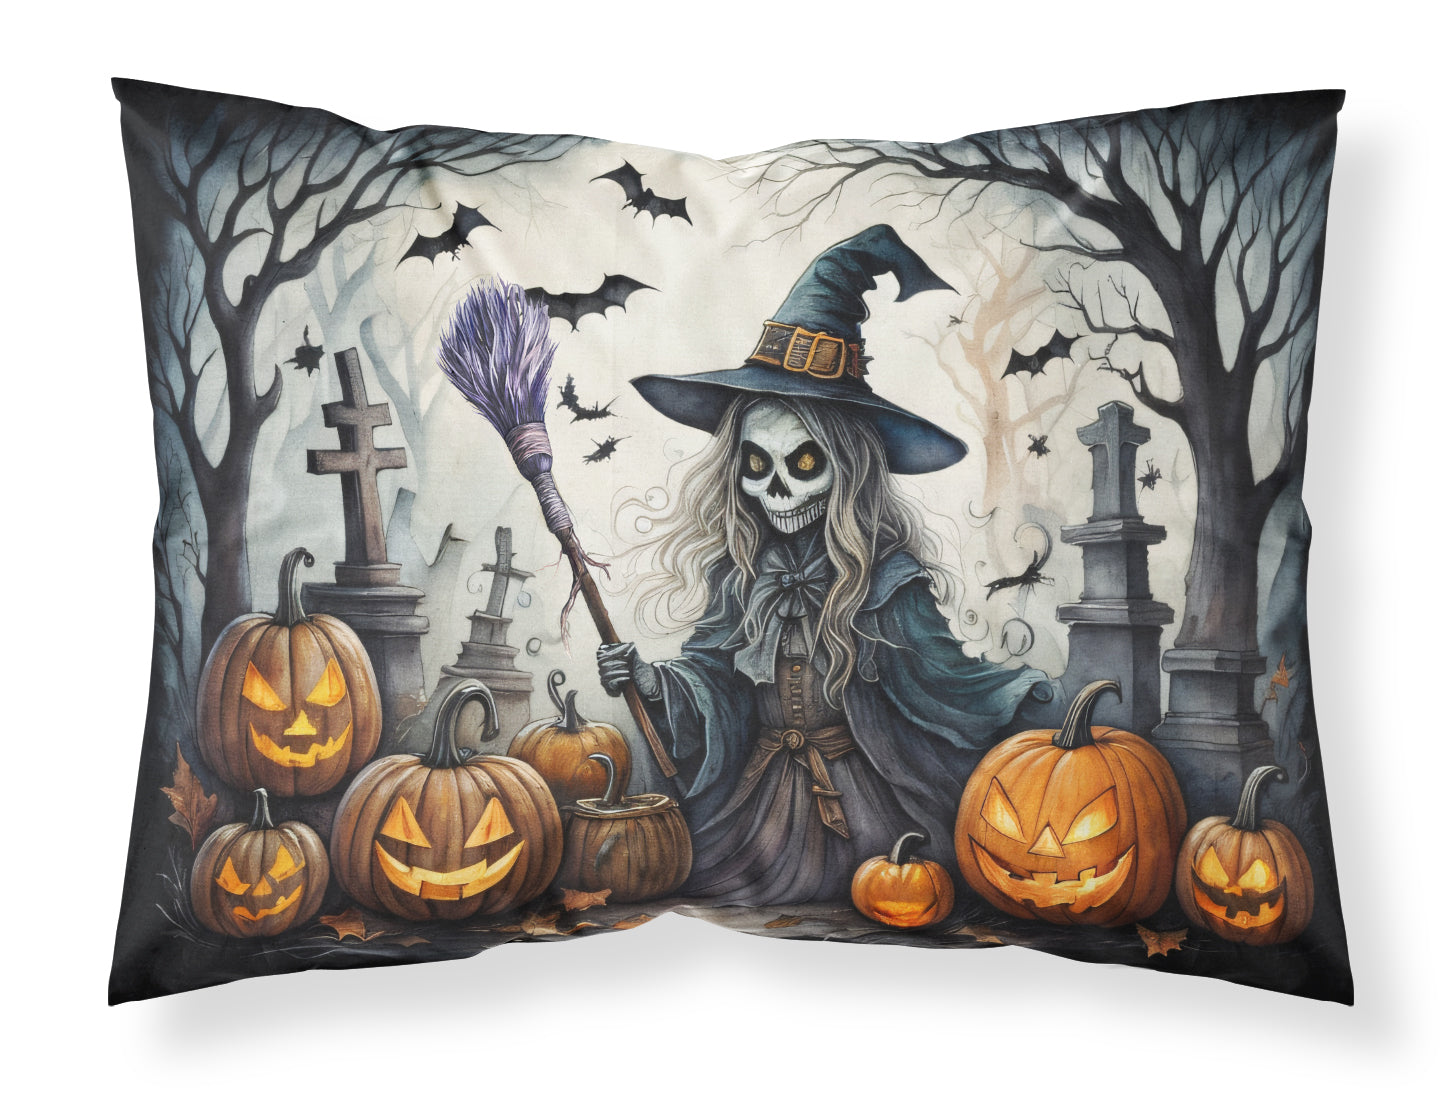 Buy this Witch Spooky Halloween Fabric Standard Pillowcase